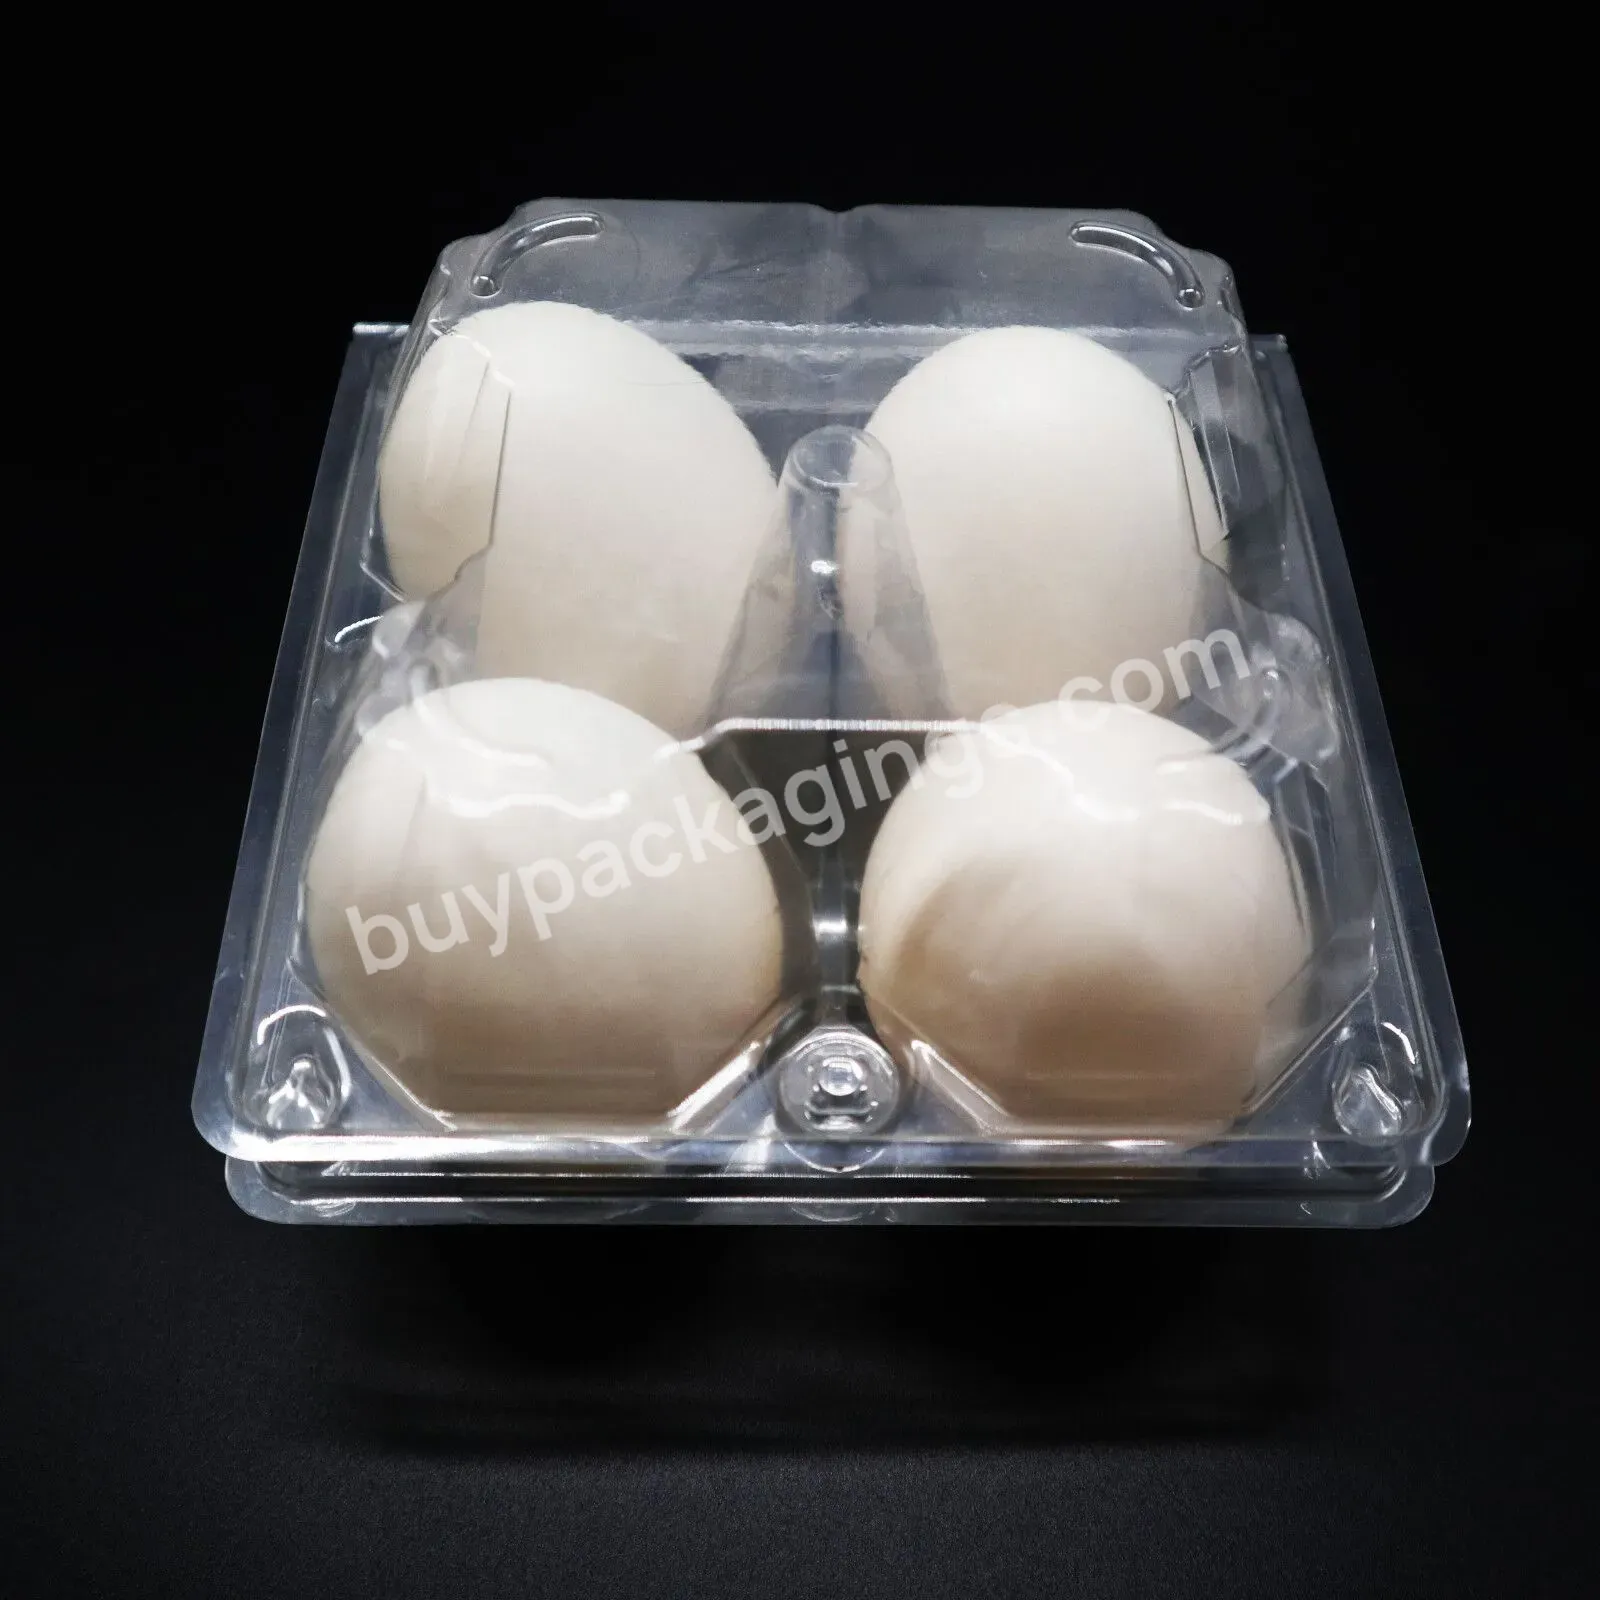 Wholesale 4 Hole High Quality Biodegradable Pet Blister Disposable Plastic Egg Tray In Food Grade - Buy Pet Plastic Egg Tray In Food Grade,Packaging Trays Duck Egg,Plastic Chicken Egg Tray For Blister Tray.